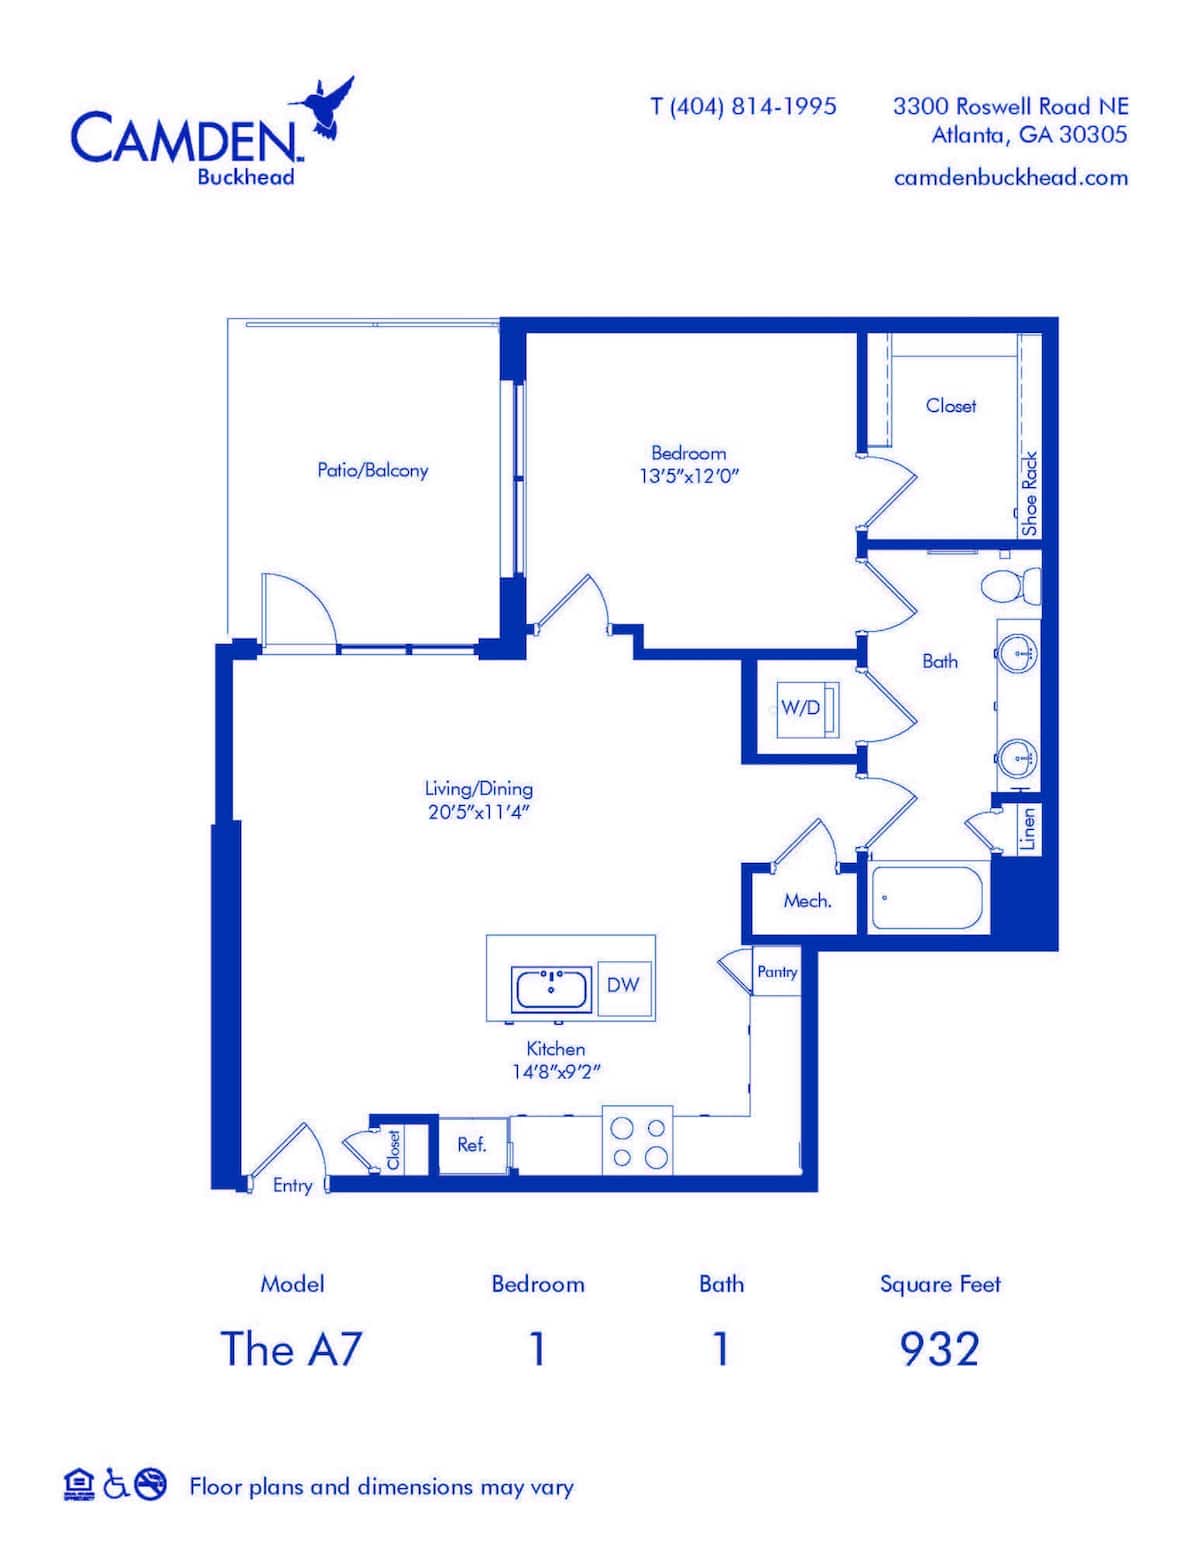 Floorplan diagram for The A7, showing 1 bedroom